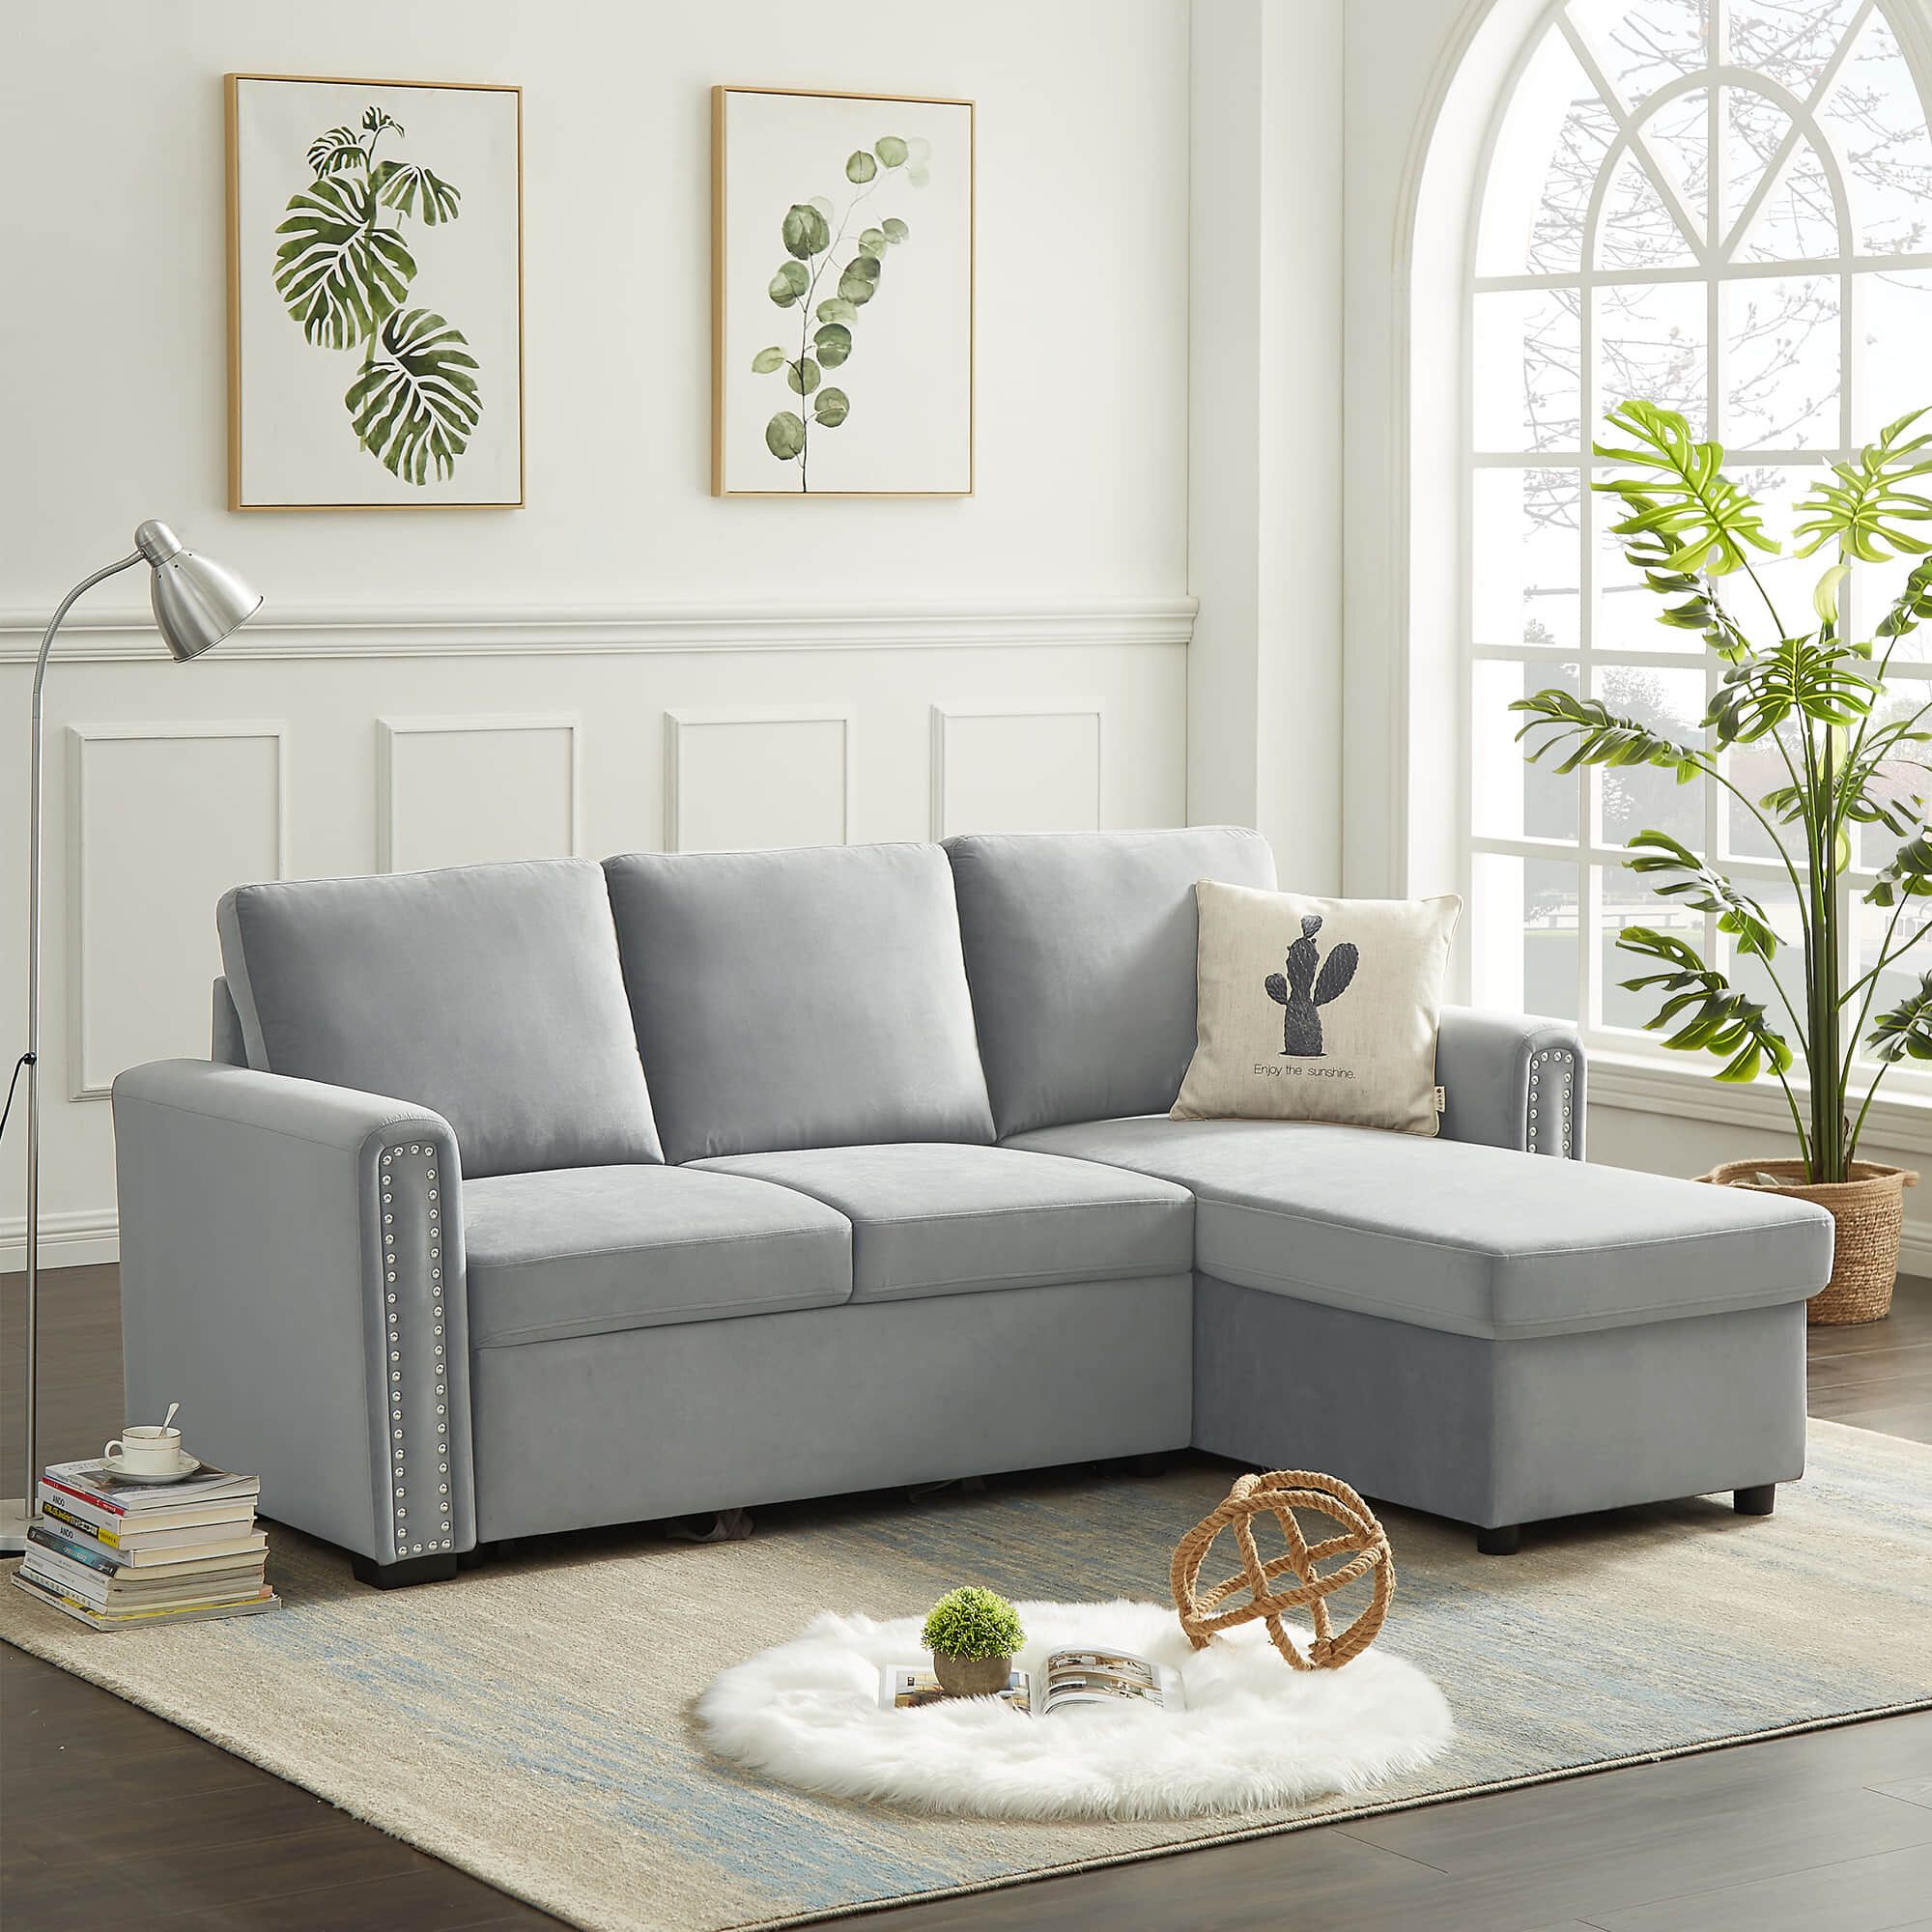 Latitude Run® 83" Convertible Sectional Sofa Couch, 3 Seater L Shape Corner Couch  Sofa Bed With Storage For Living Room Apartment | Wayfair Intended For 3 Seat Convertible Sectional Sofas (View 9 of 15)